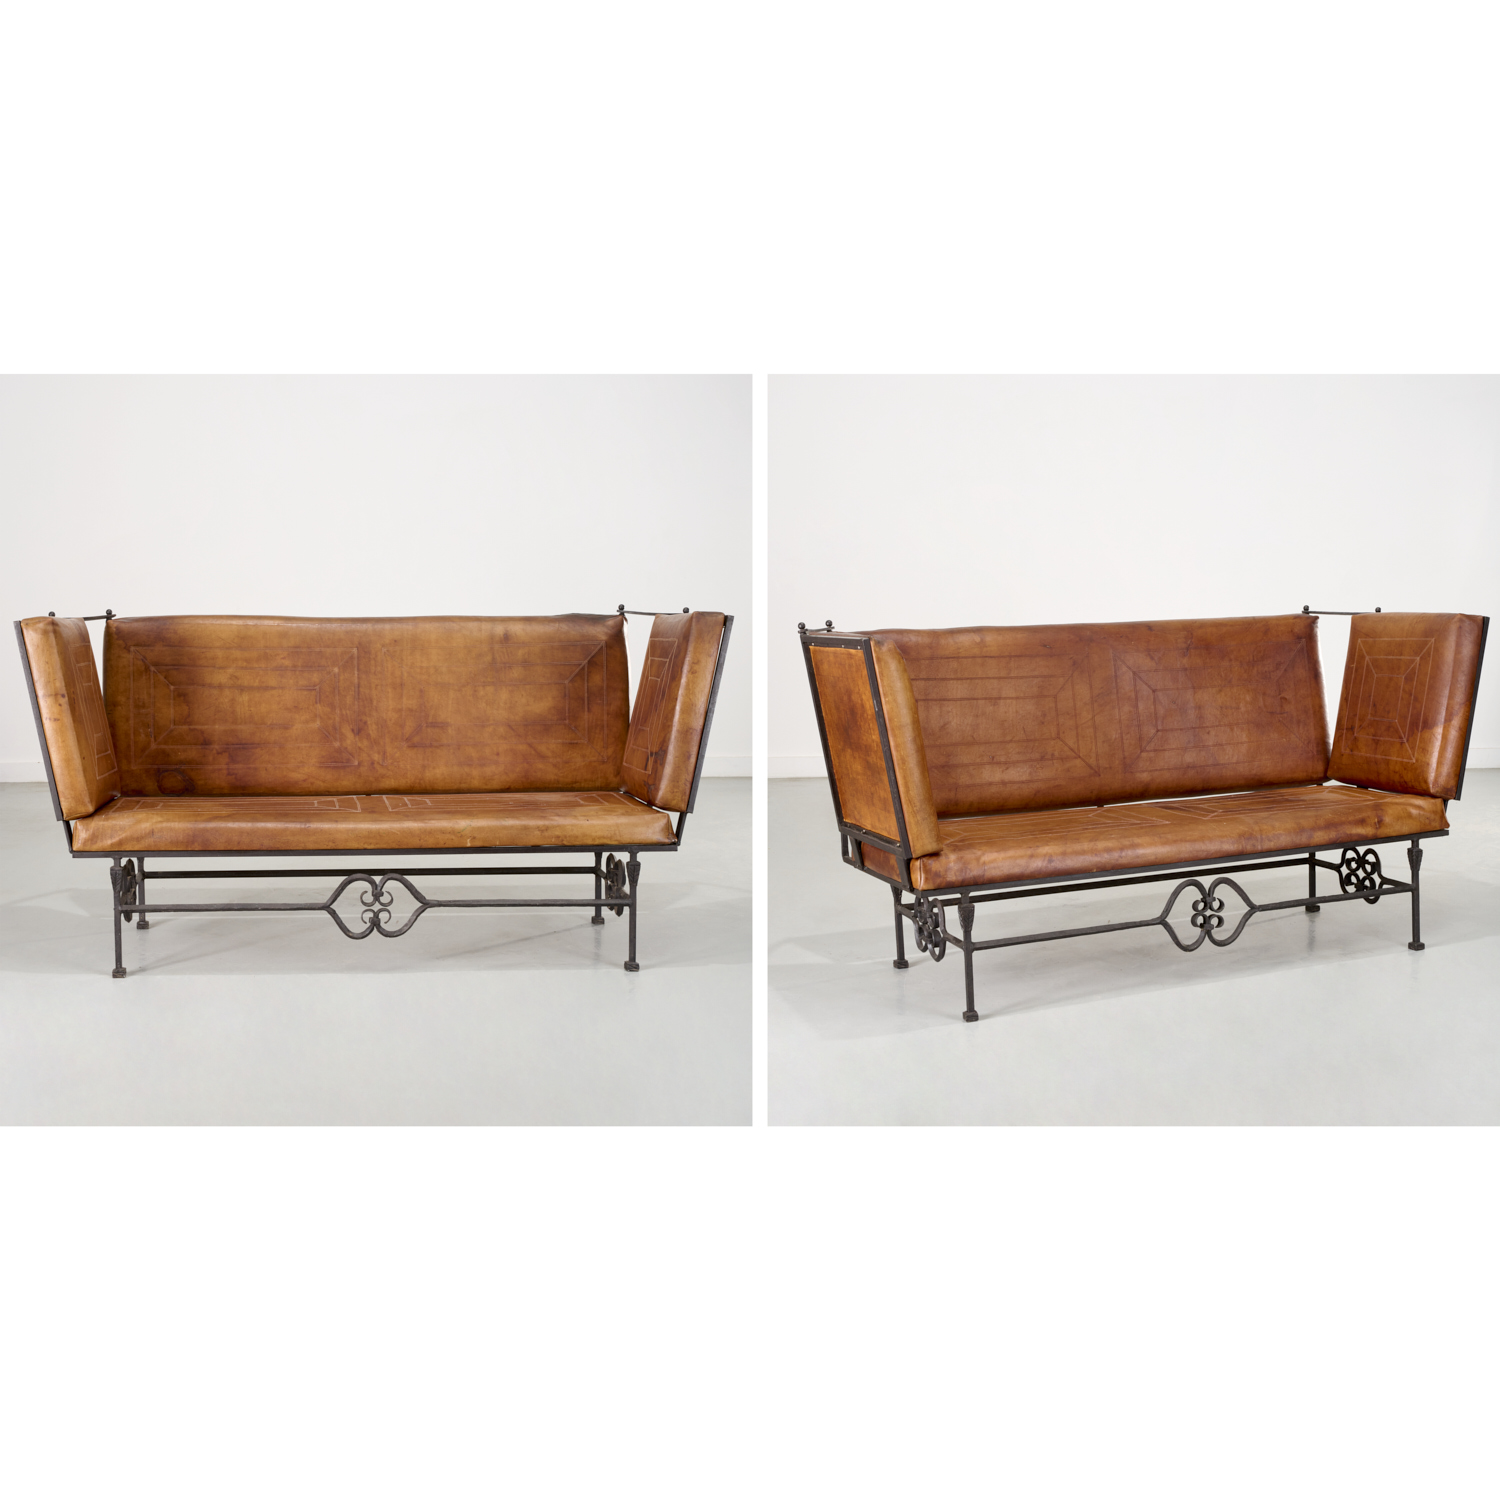 PAIR ART DECO LEATHER & WROUGHT